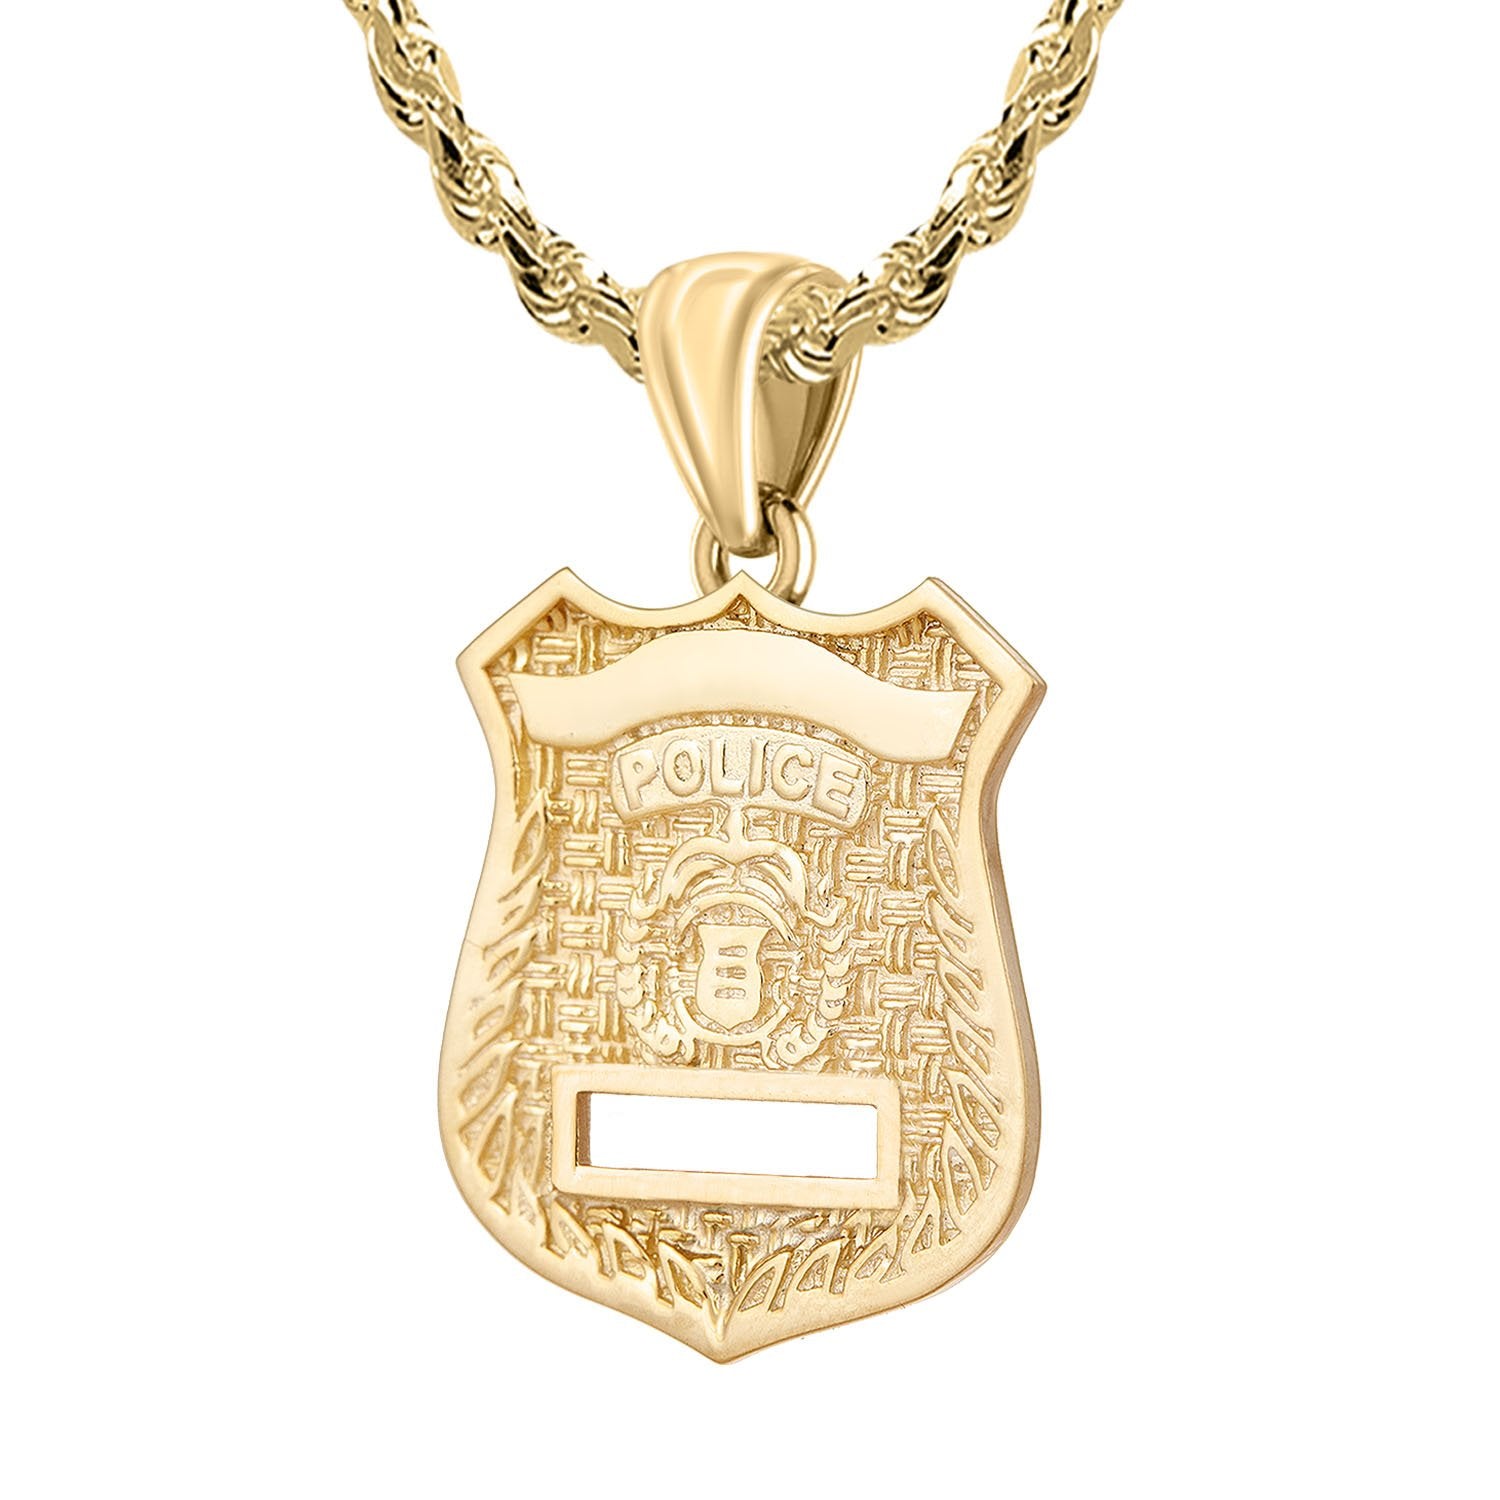 Police Badge Necklace In Gold of 26mm - 3.5mm Rope Chain